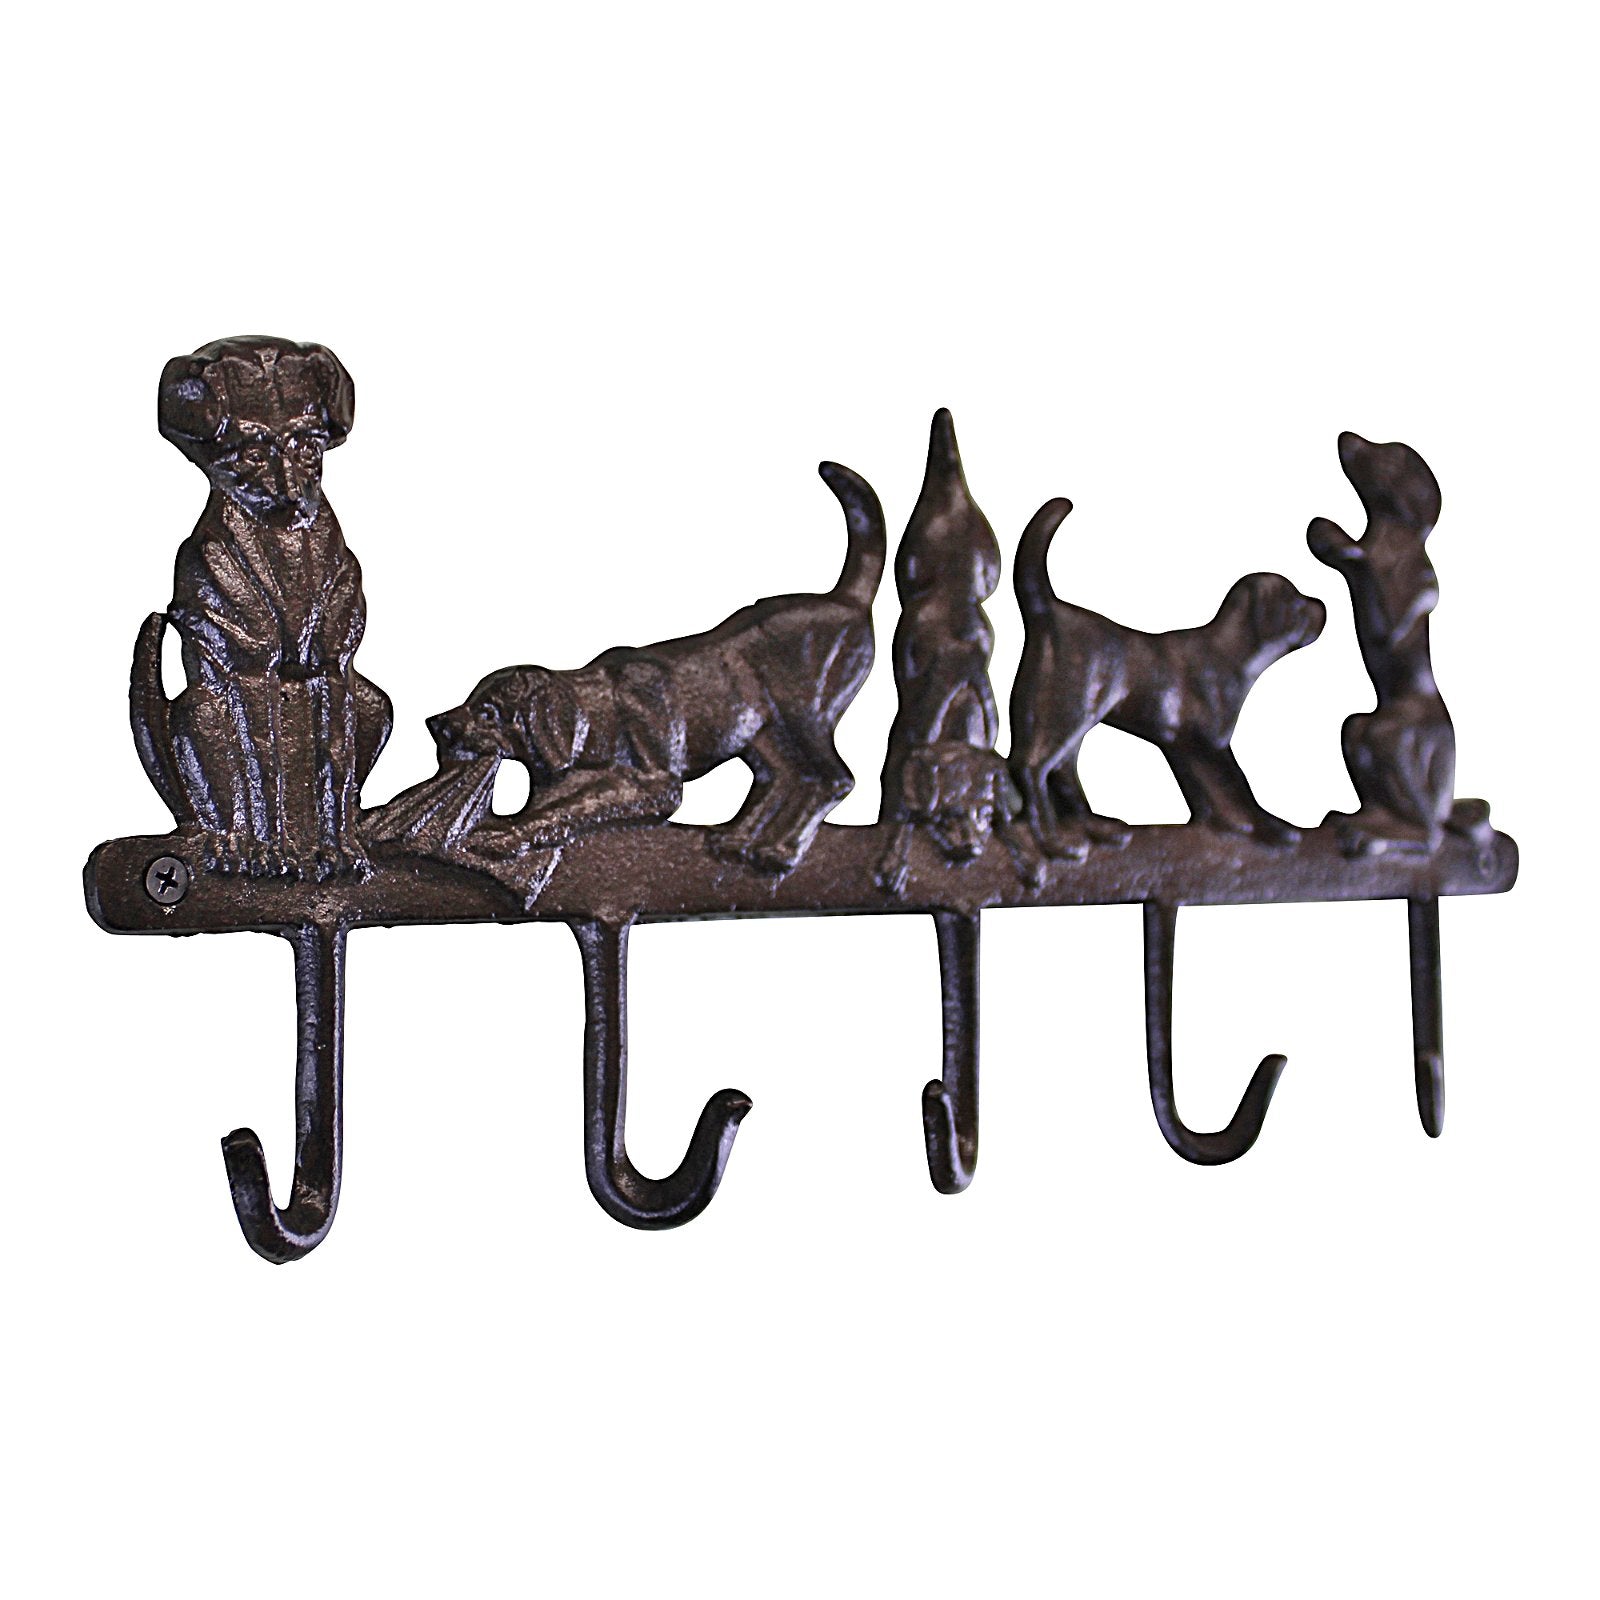 View Rustic Cast Iron Wall Hooks Playful Dog Design With 5 Hooks information